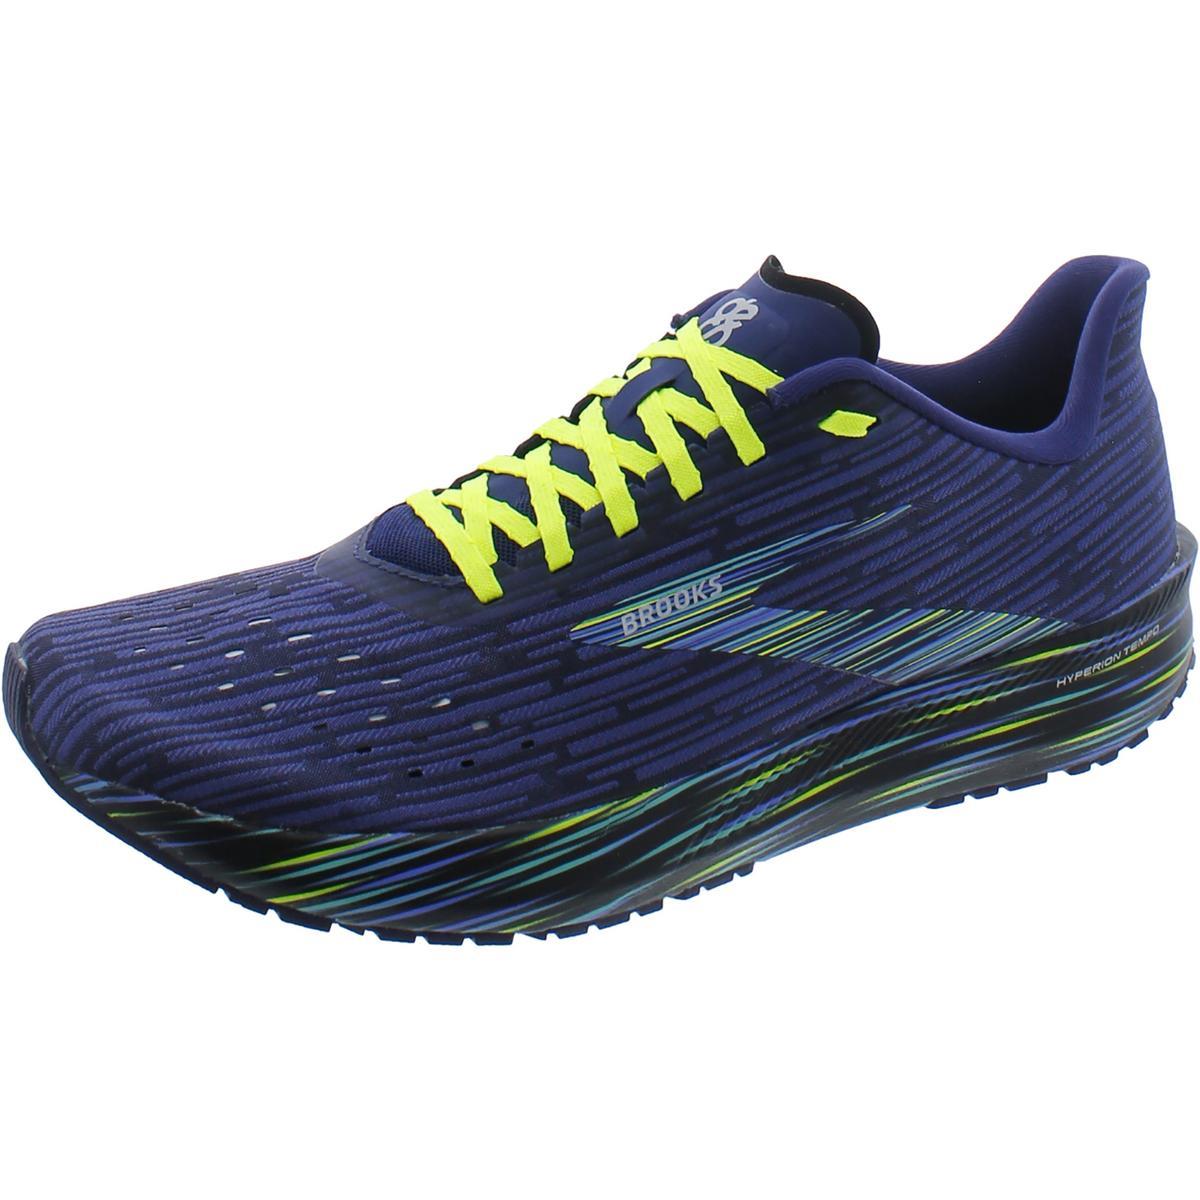 Brooks Mens Hyperion Tempo Fitness Workout Running Shoes Sneakers Bhfo 8544 - Coral/Cosmo/Phantom